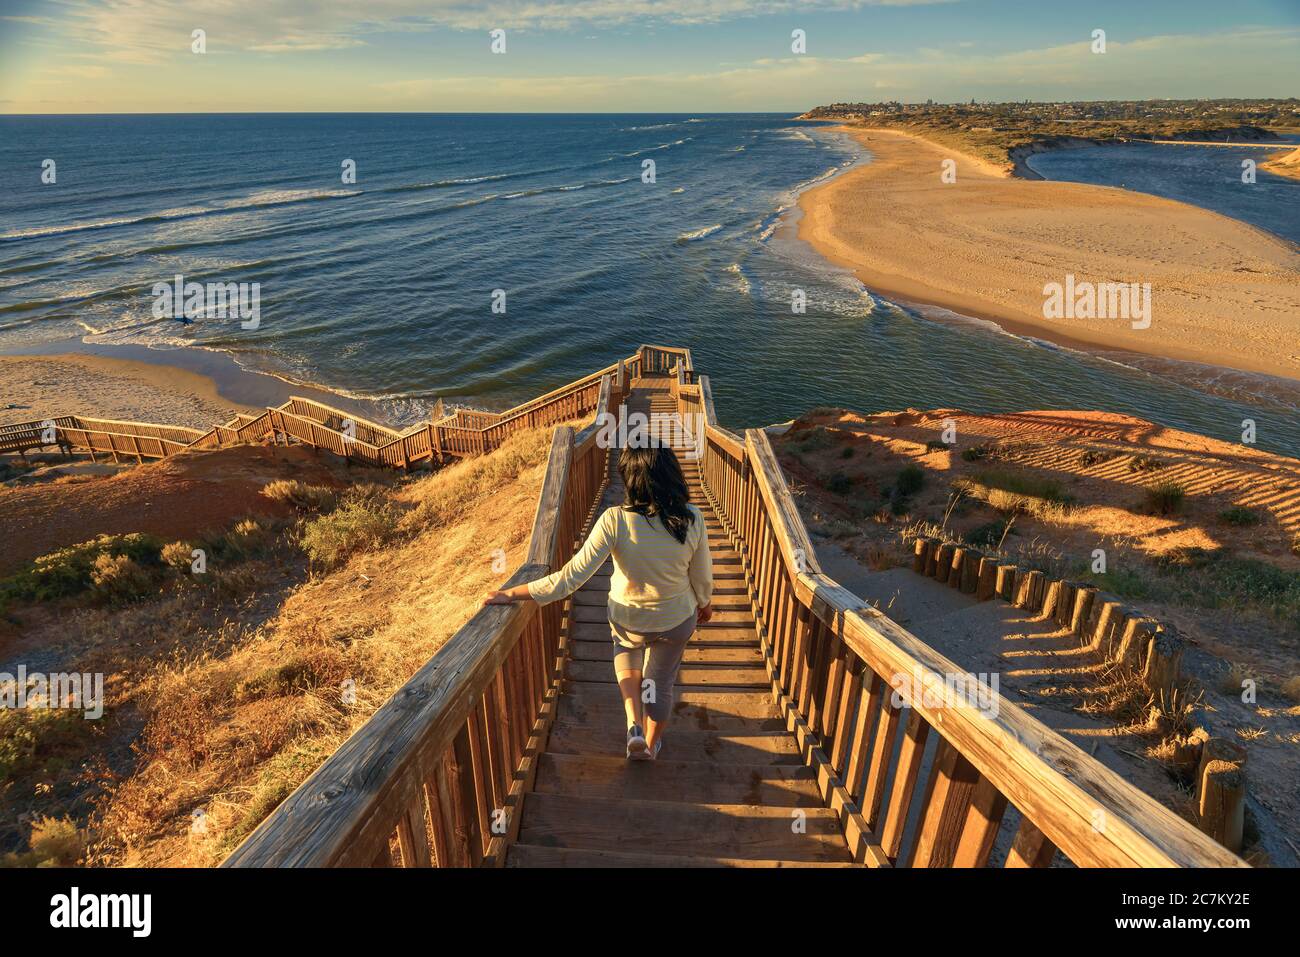 Woman walking down iconic Port Noarlunga boardwalk while watching spectacular sunset view, South Australia Stock Photo